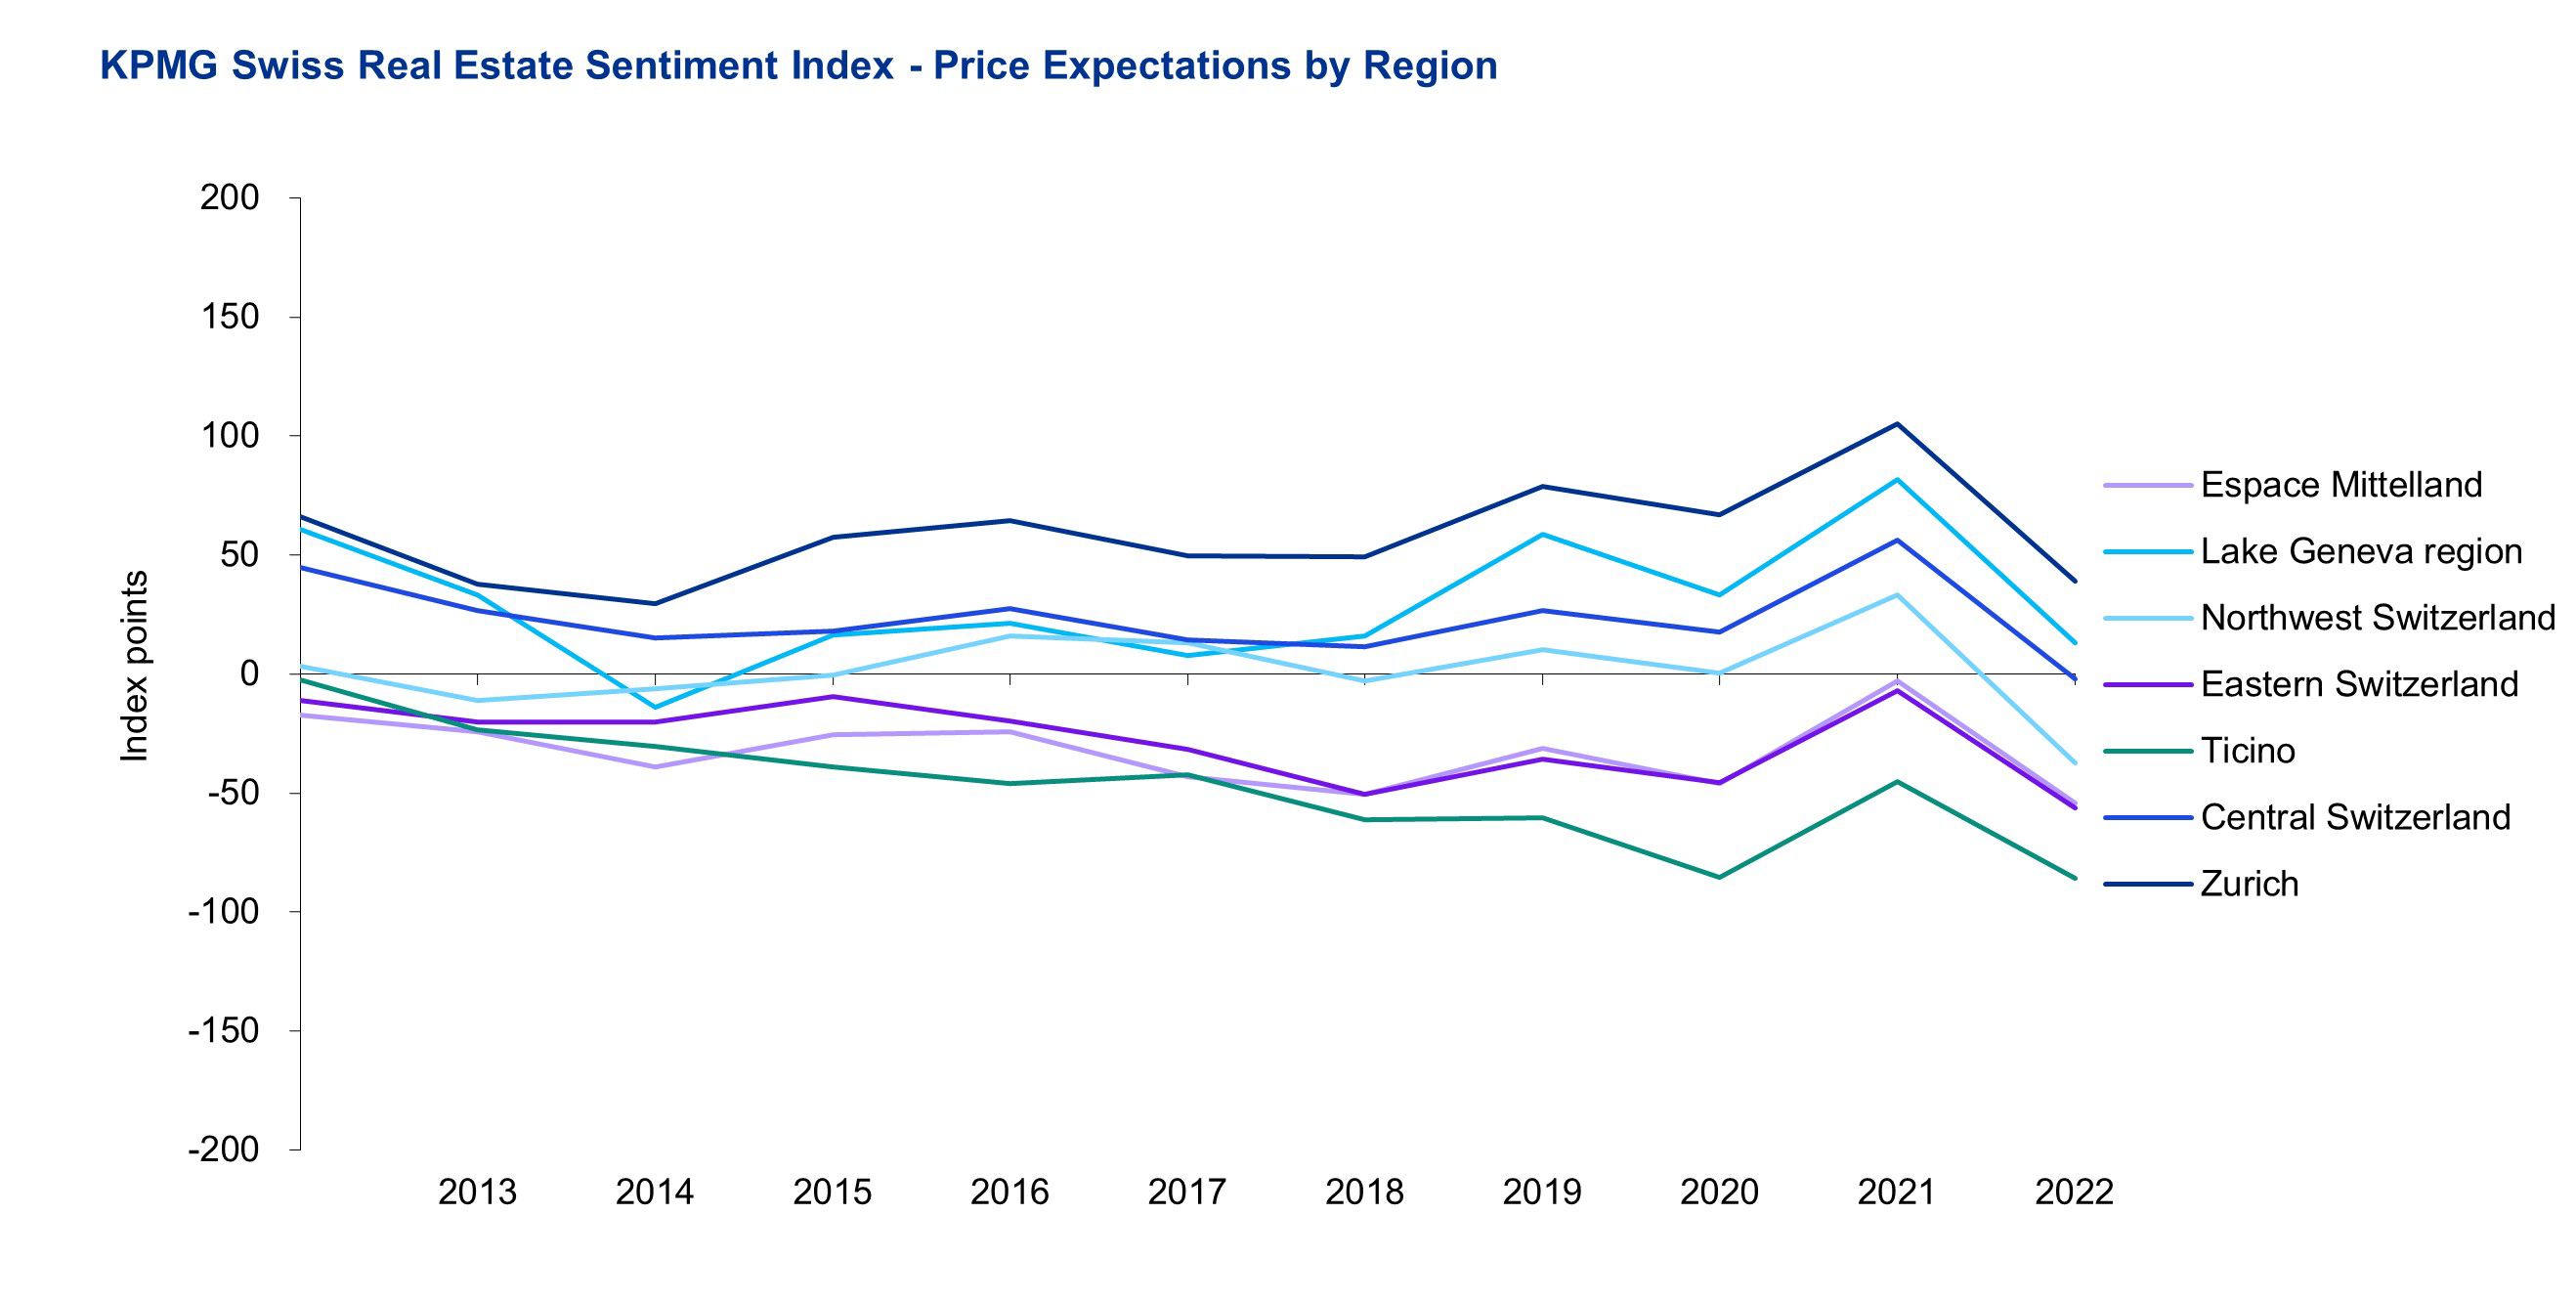 Price Expectation Index by Region